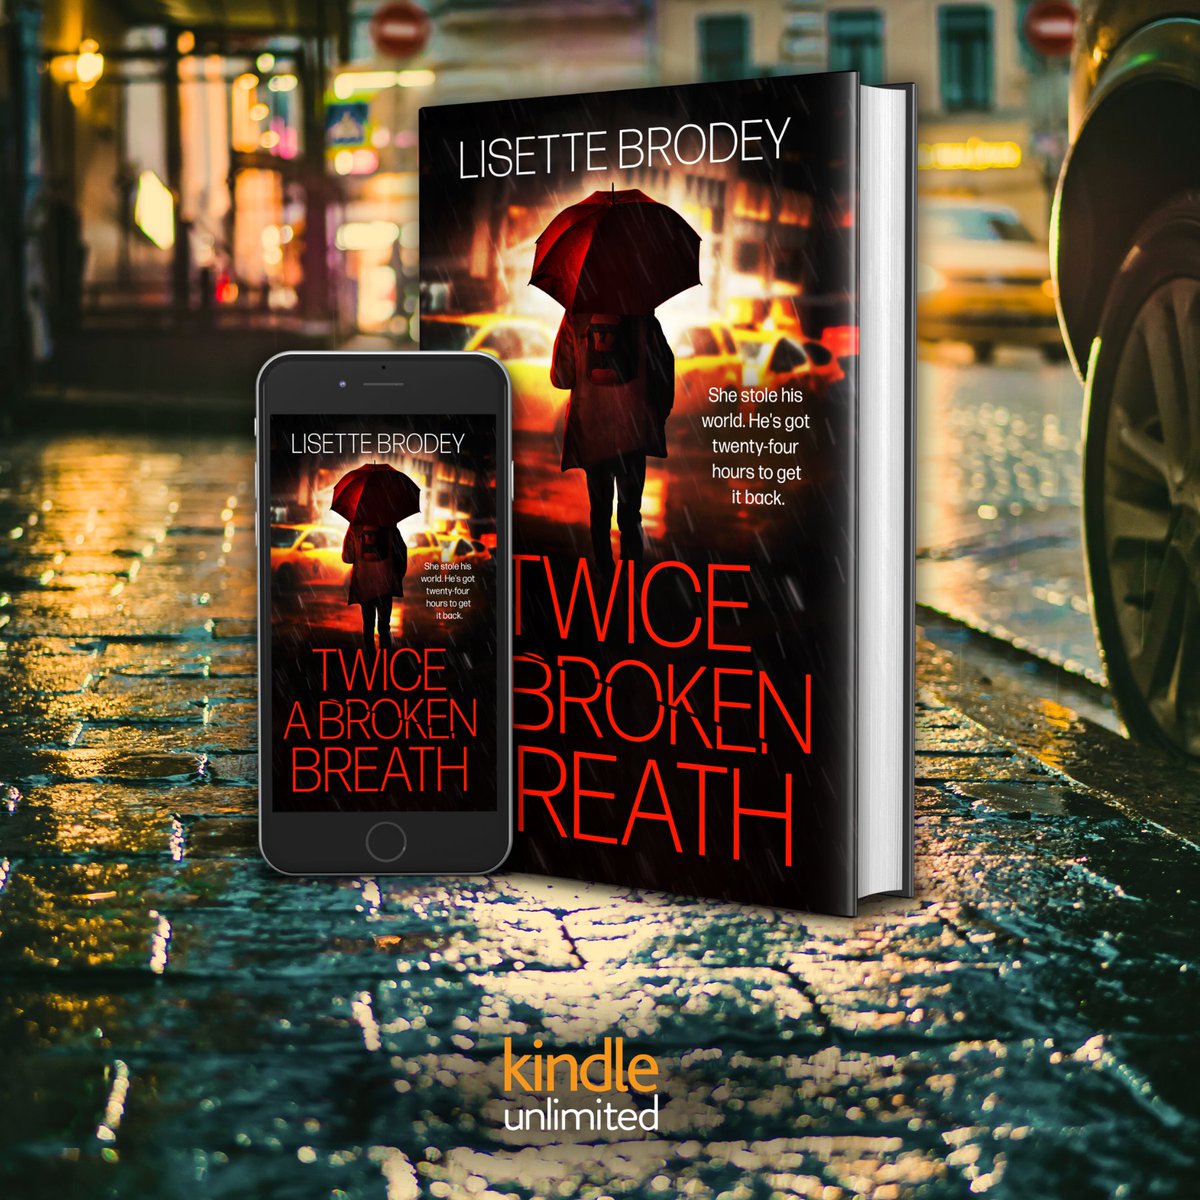 TWICE A BROKEN BREATH 'I loved the atmosphere of the book, much of which takes place at night, and I loved the characters as well as the edge-of-my-seat drama.' ☔️💦 mybook.to/TwiceBroken 📕 #suspense 💥 #NewYorkCity 🌆 #KindleUnlimited